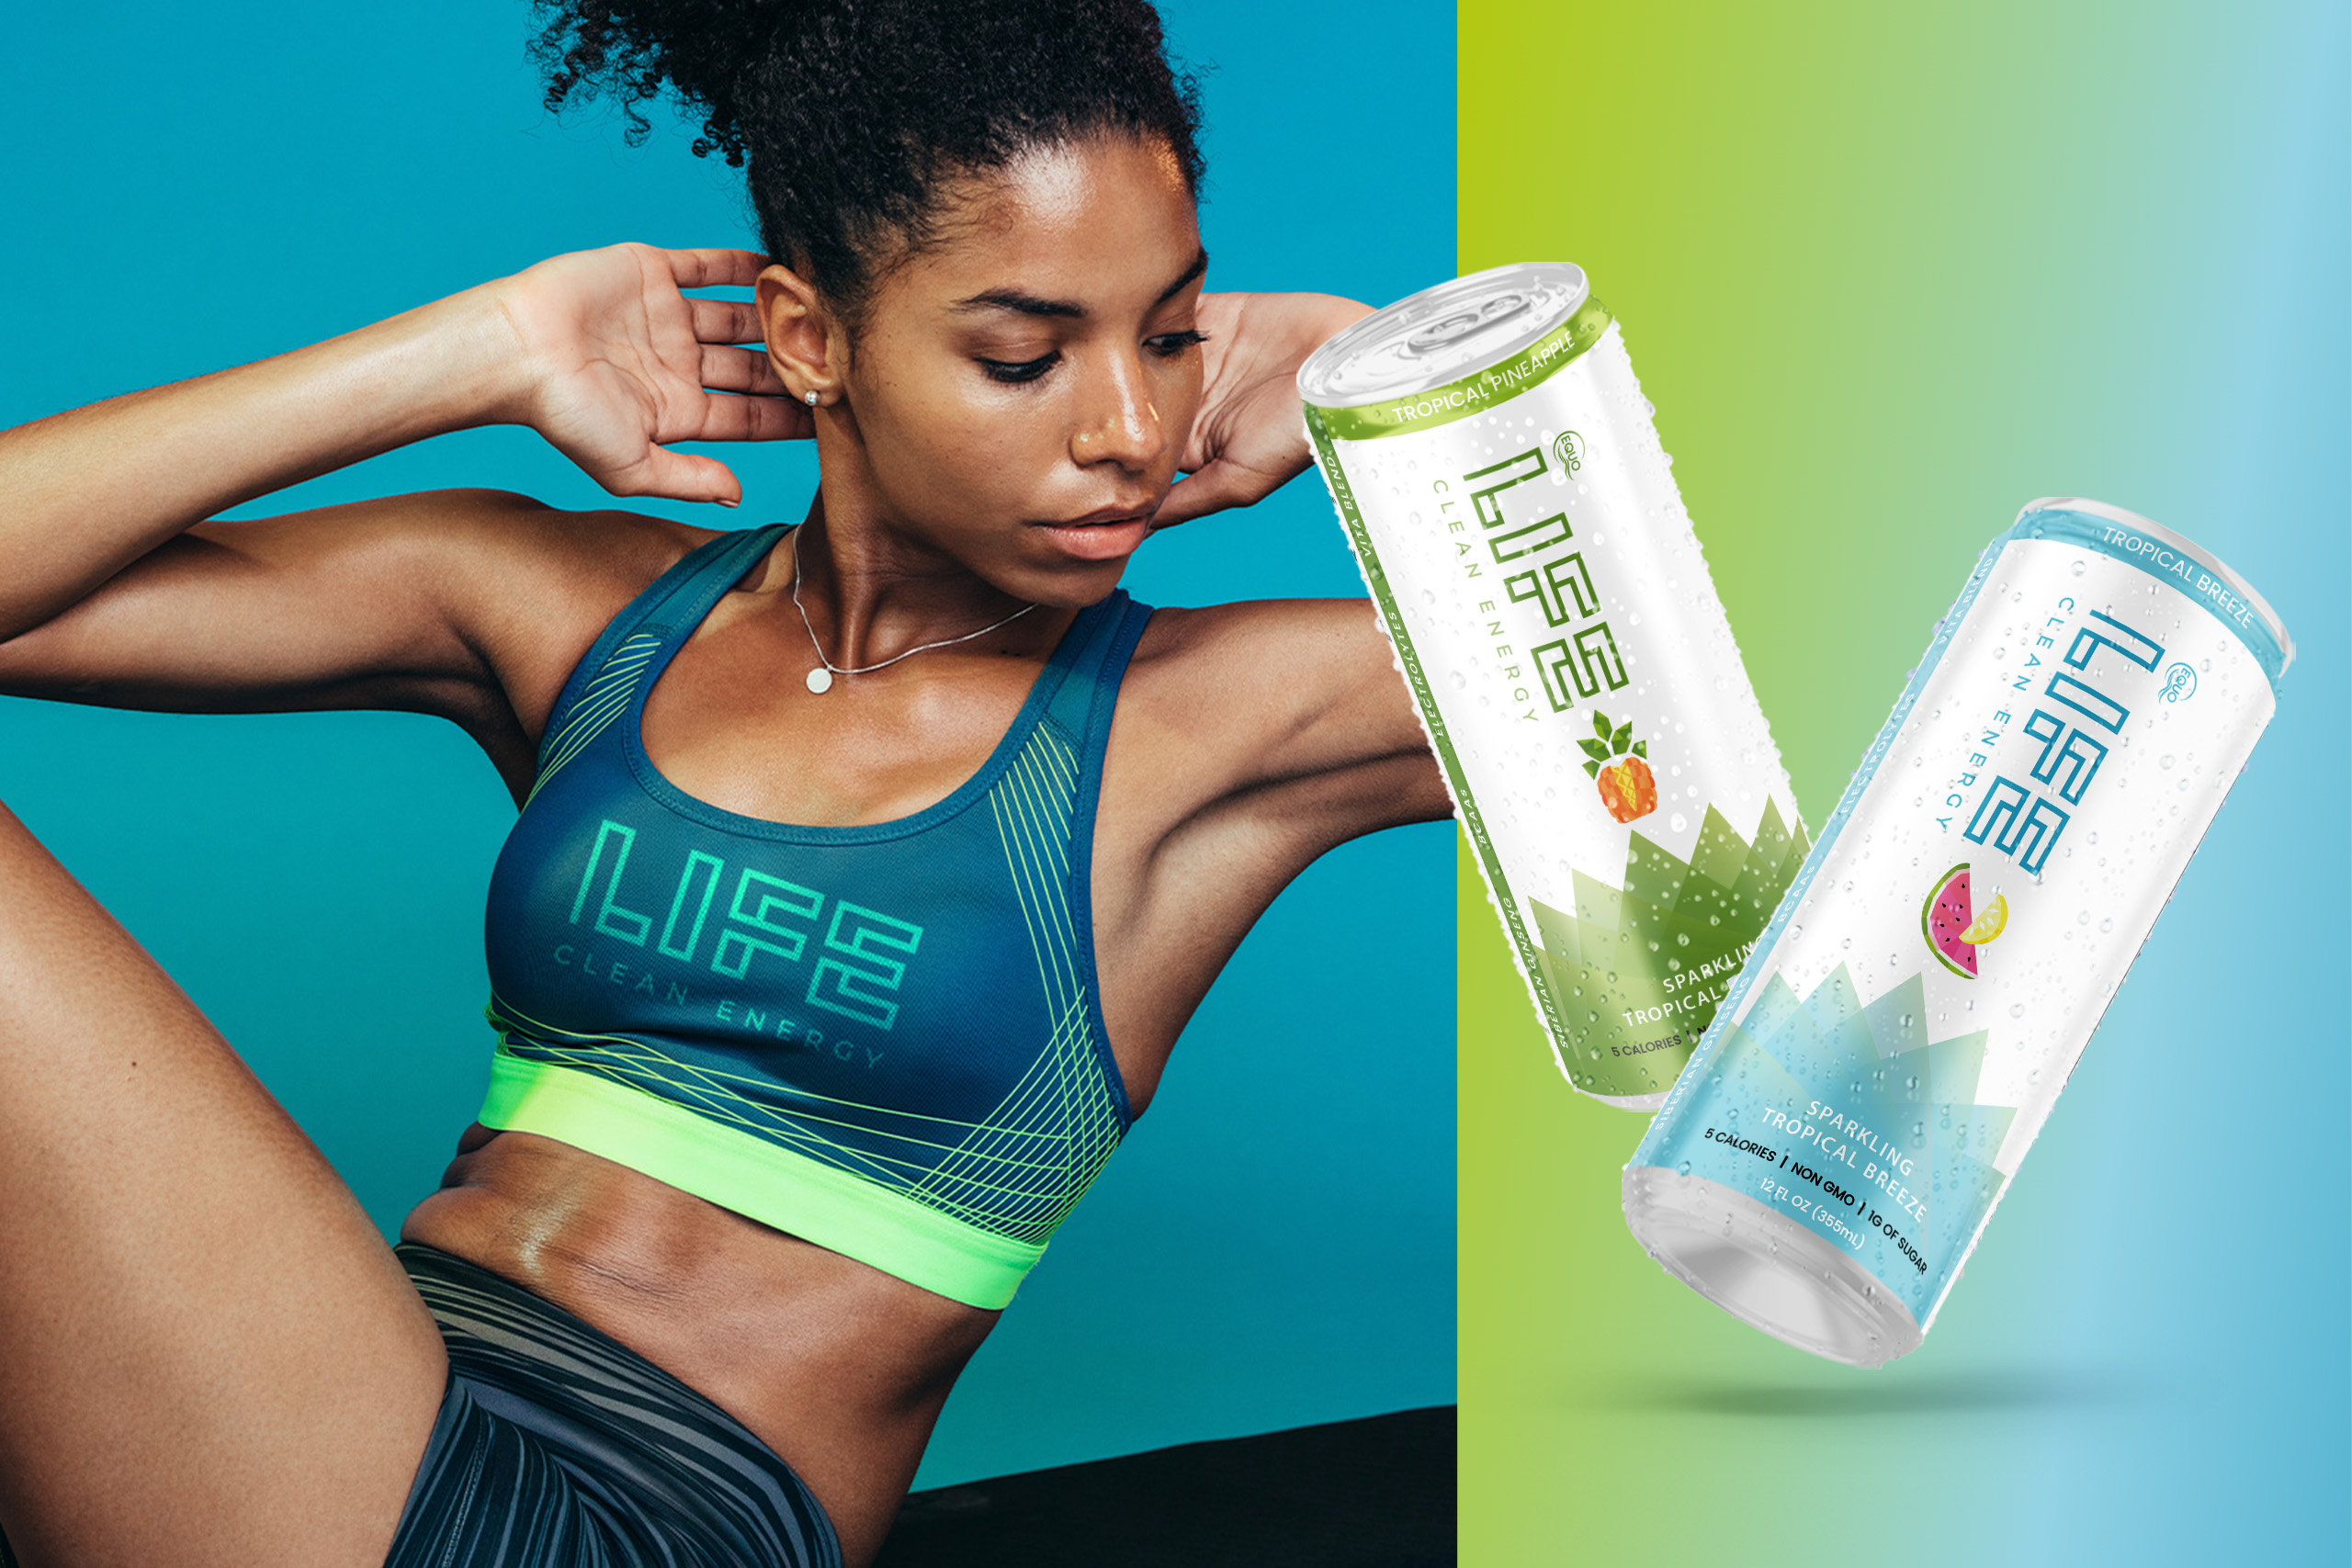 life clean energy tropical breeze and tropical pineaple - woman doing workout image.